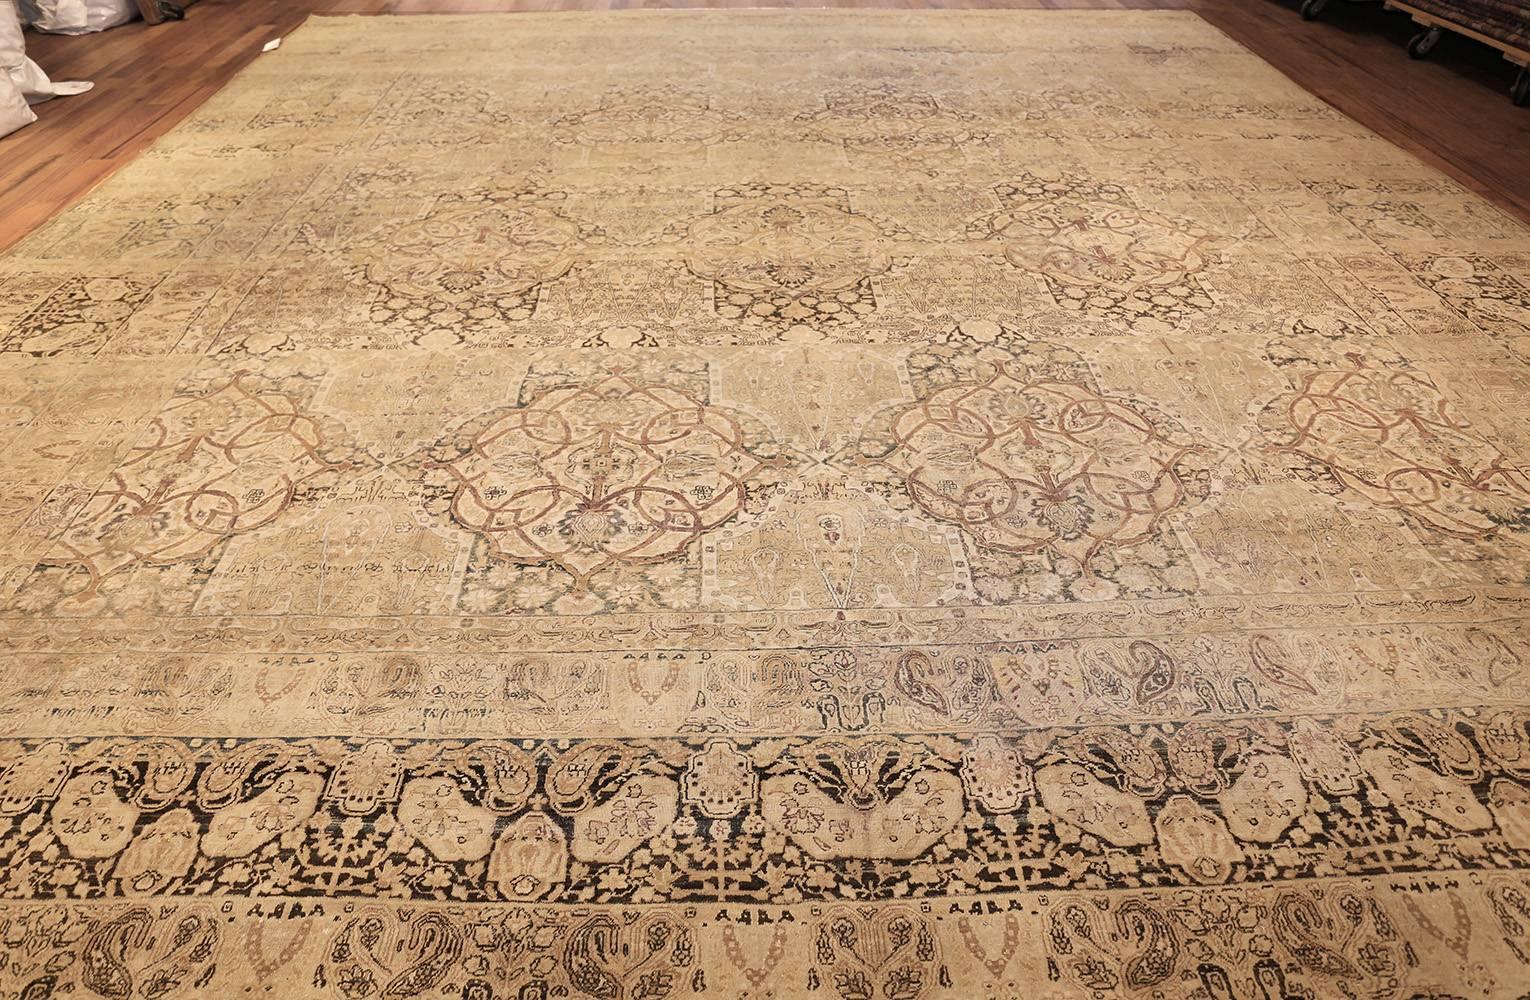 Antique Kerman Carpet, Persia, 1900 -- Beautiful in its carefully interconnected, arabesque elements and hues, this Kerman carpet features characteristic medallions throughout its luxurious ivory field. Despite its impressive size, the artistic